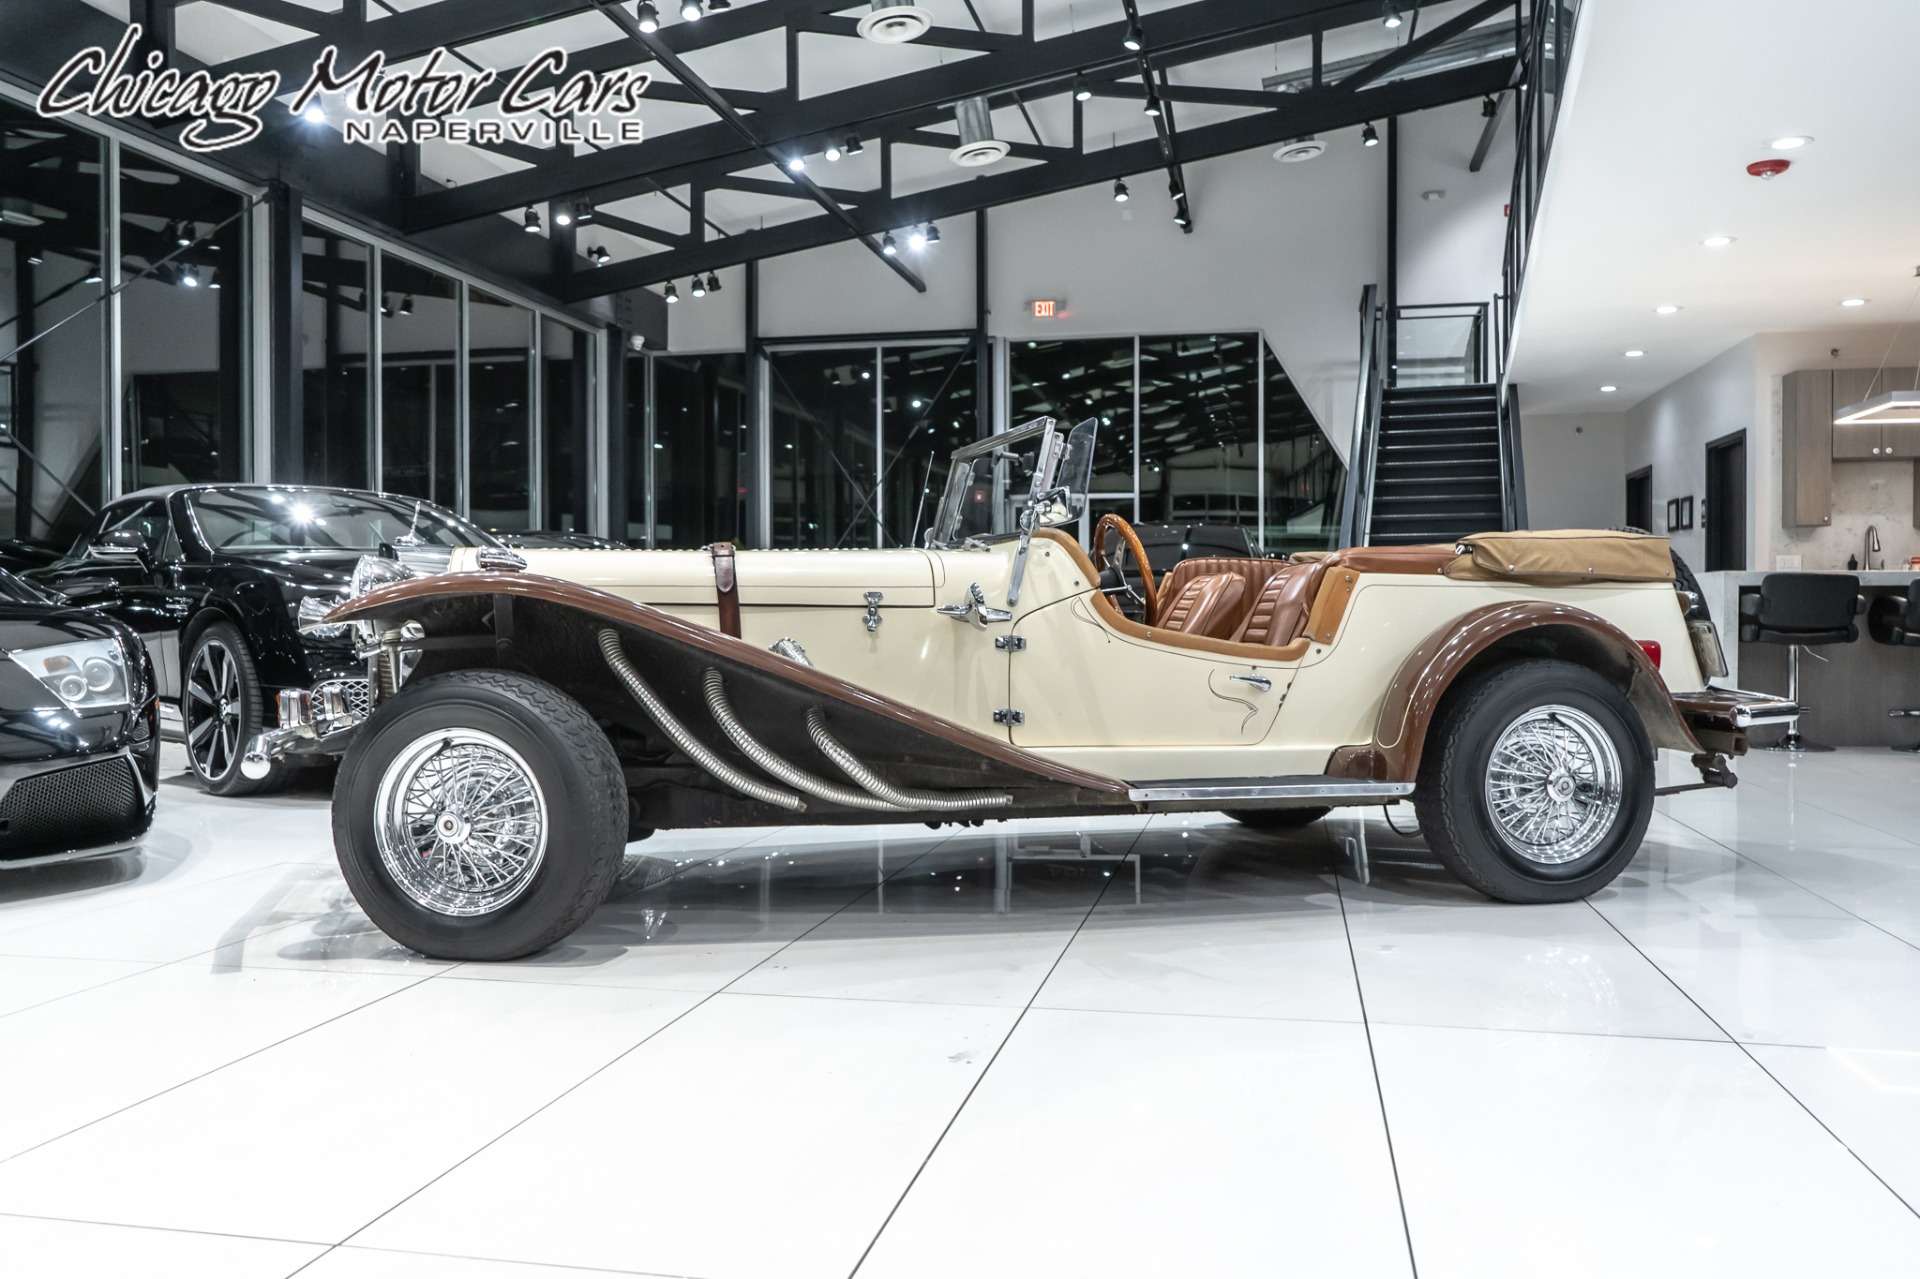 Used-1929-MERCEDES-BENZ-Gazelle-Replica-23L-Inline-4-Absolute-Blast-to-Drive